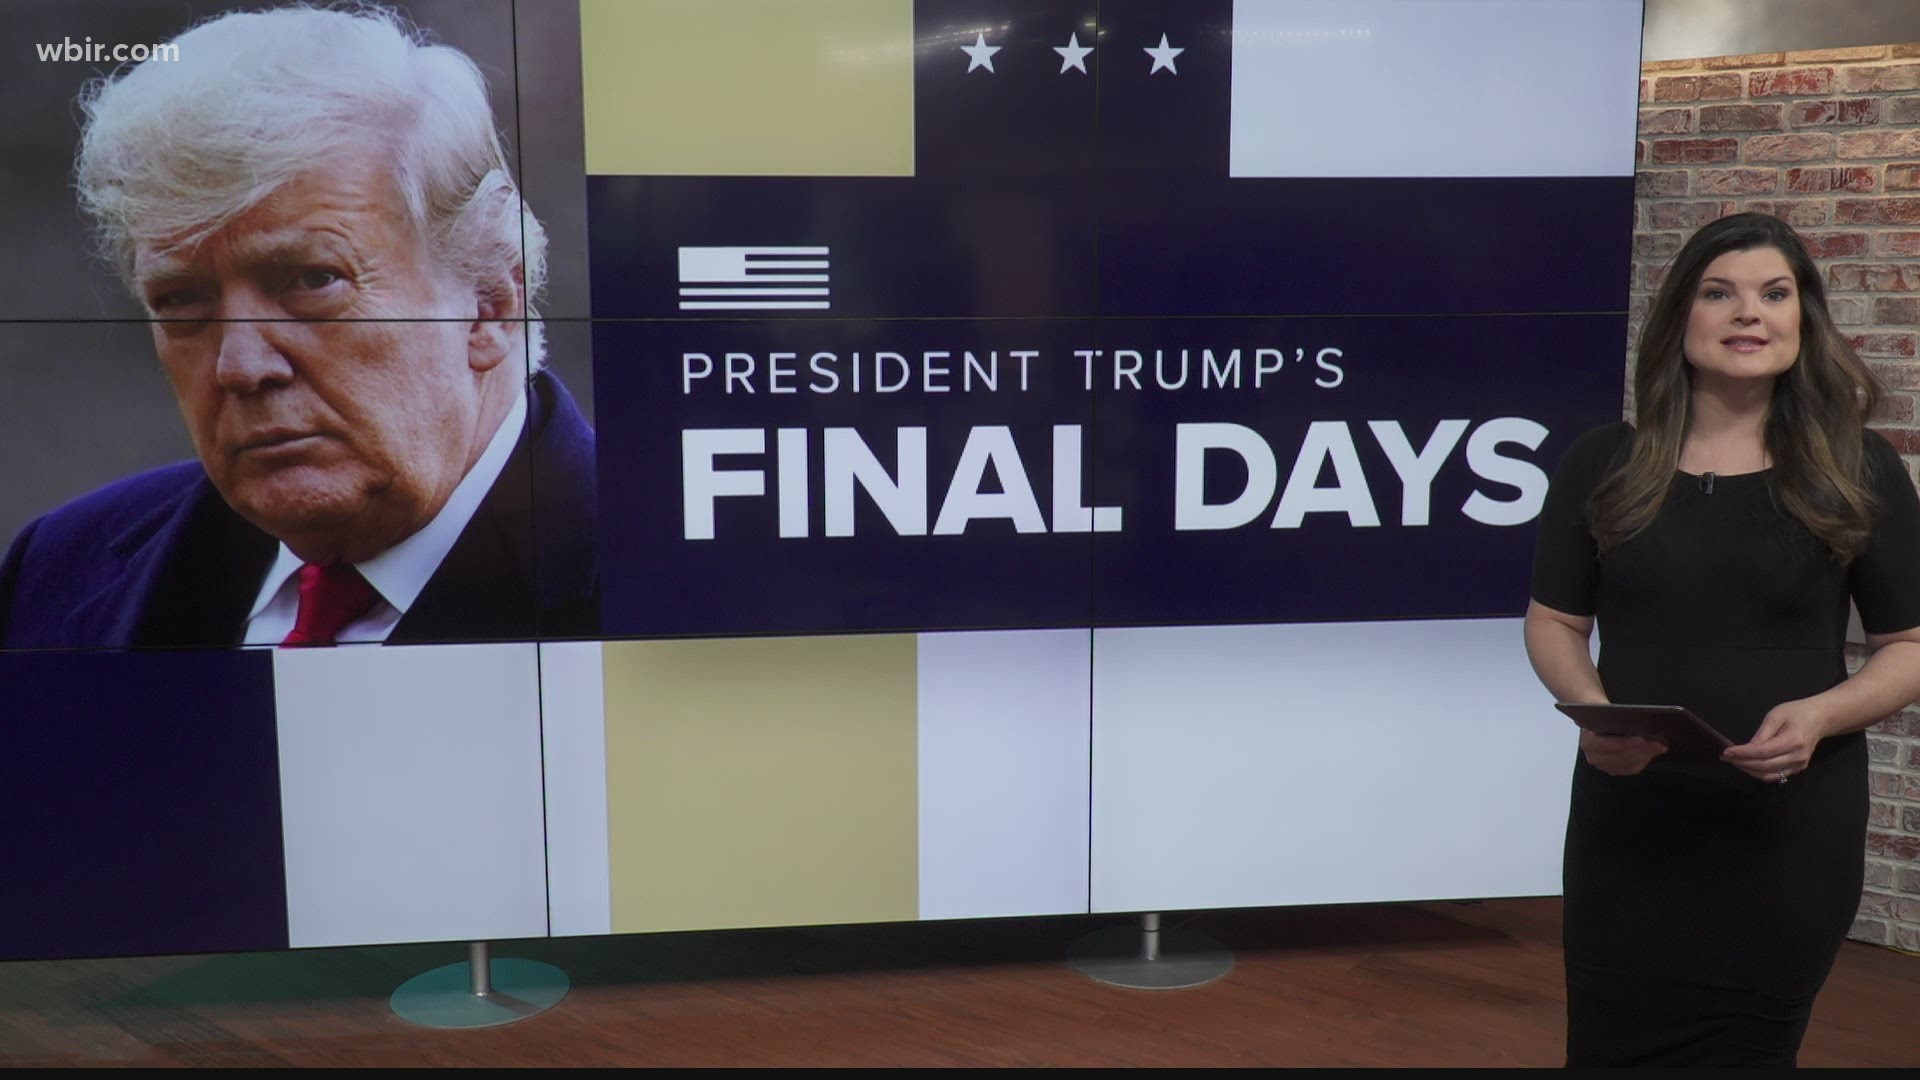 Tuesday marks President Donald Trump's last full day in the White House.